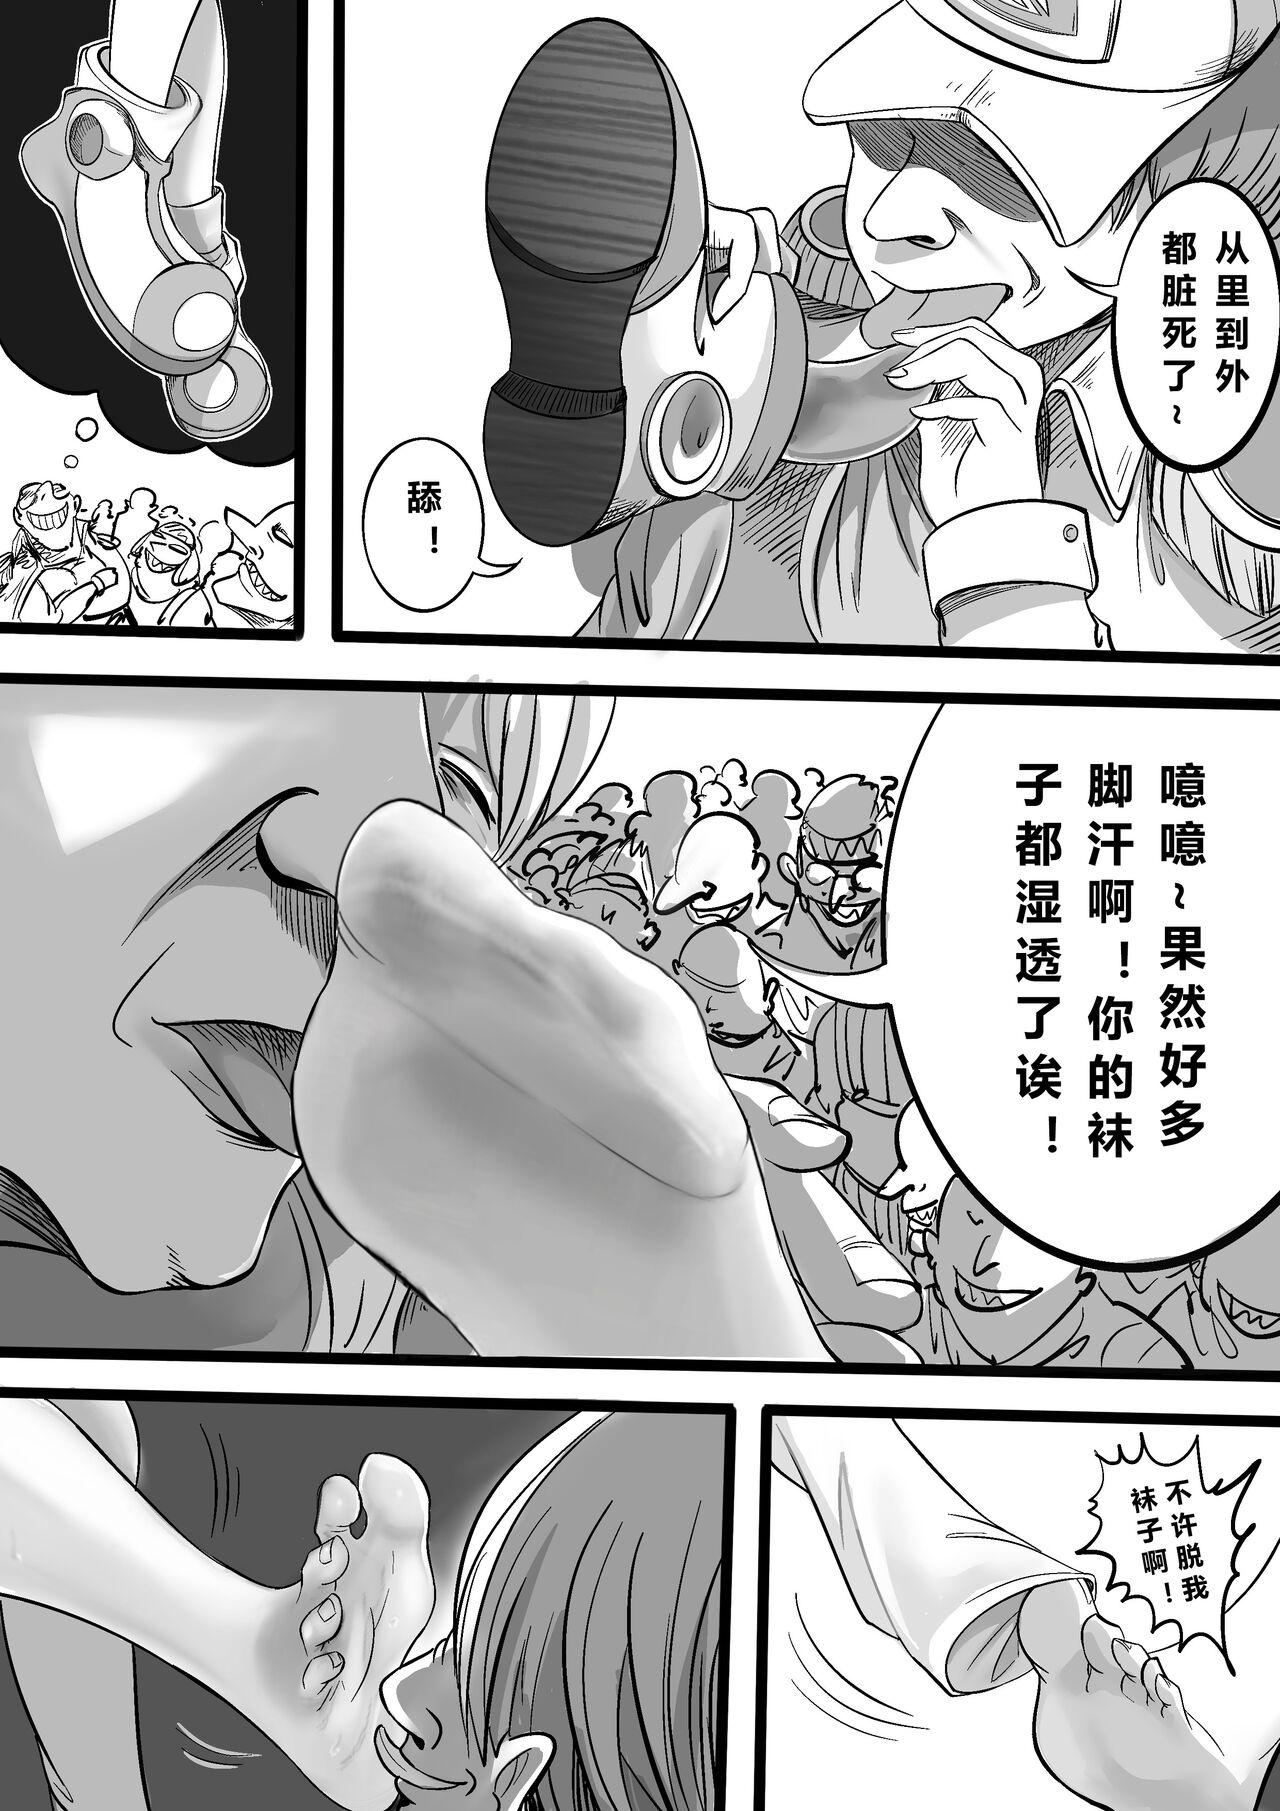 White Chick ONE PIECE 歌之魔女的监禁篇 - One piece Chacal - Page 5